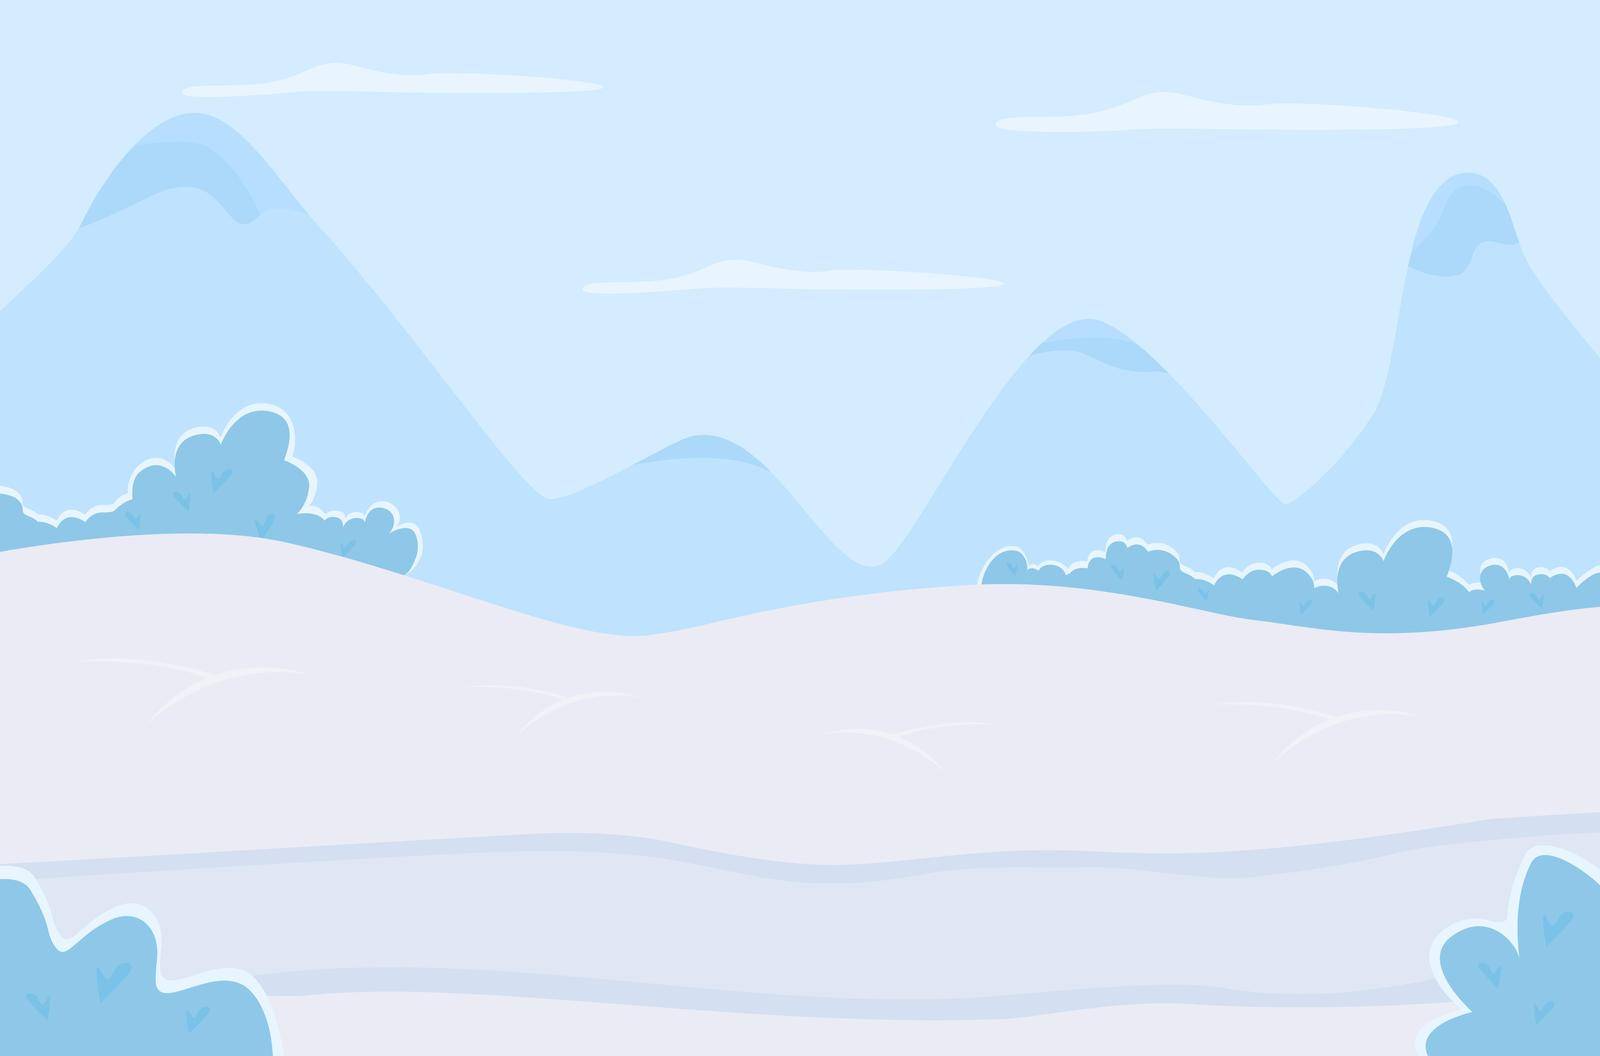 Morning in winter mountains flat color vector illustration by ntl